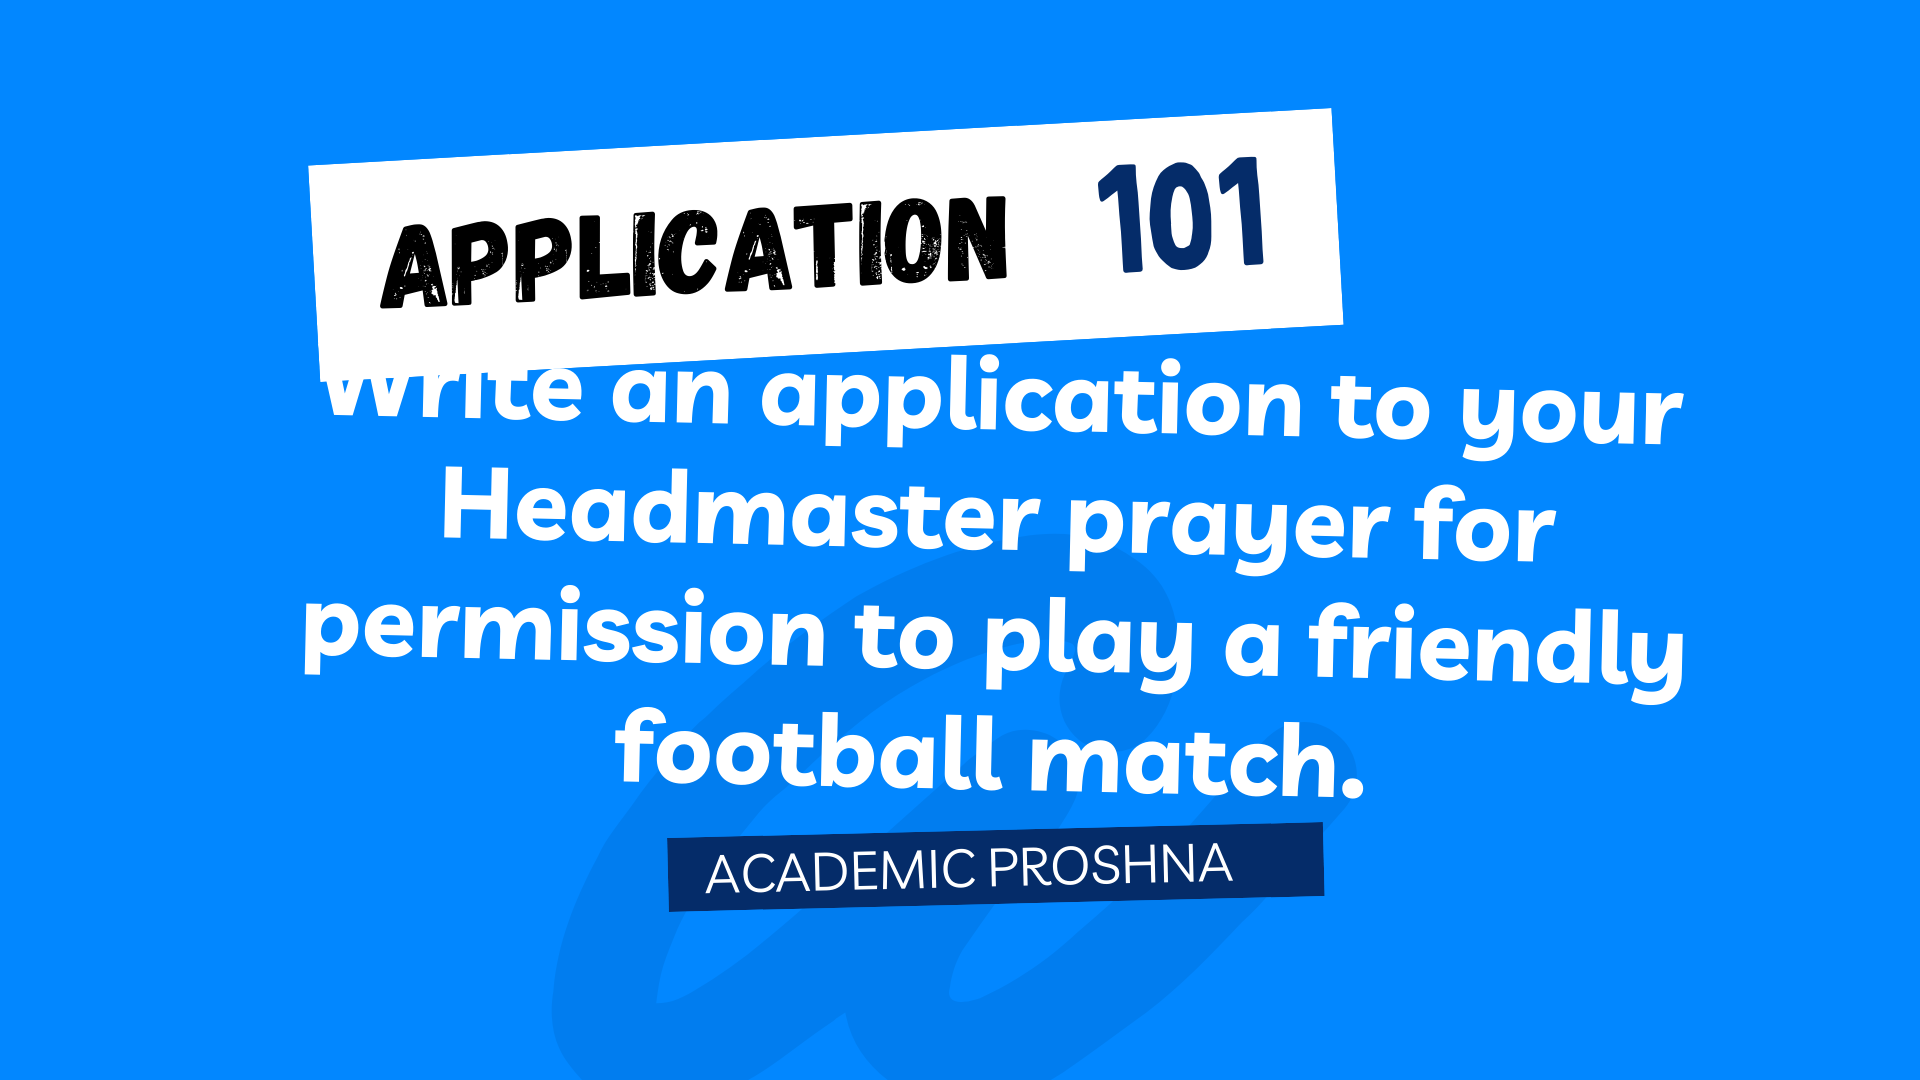 Write an application to your Headmaster prayer for permission to play a friendly football match.